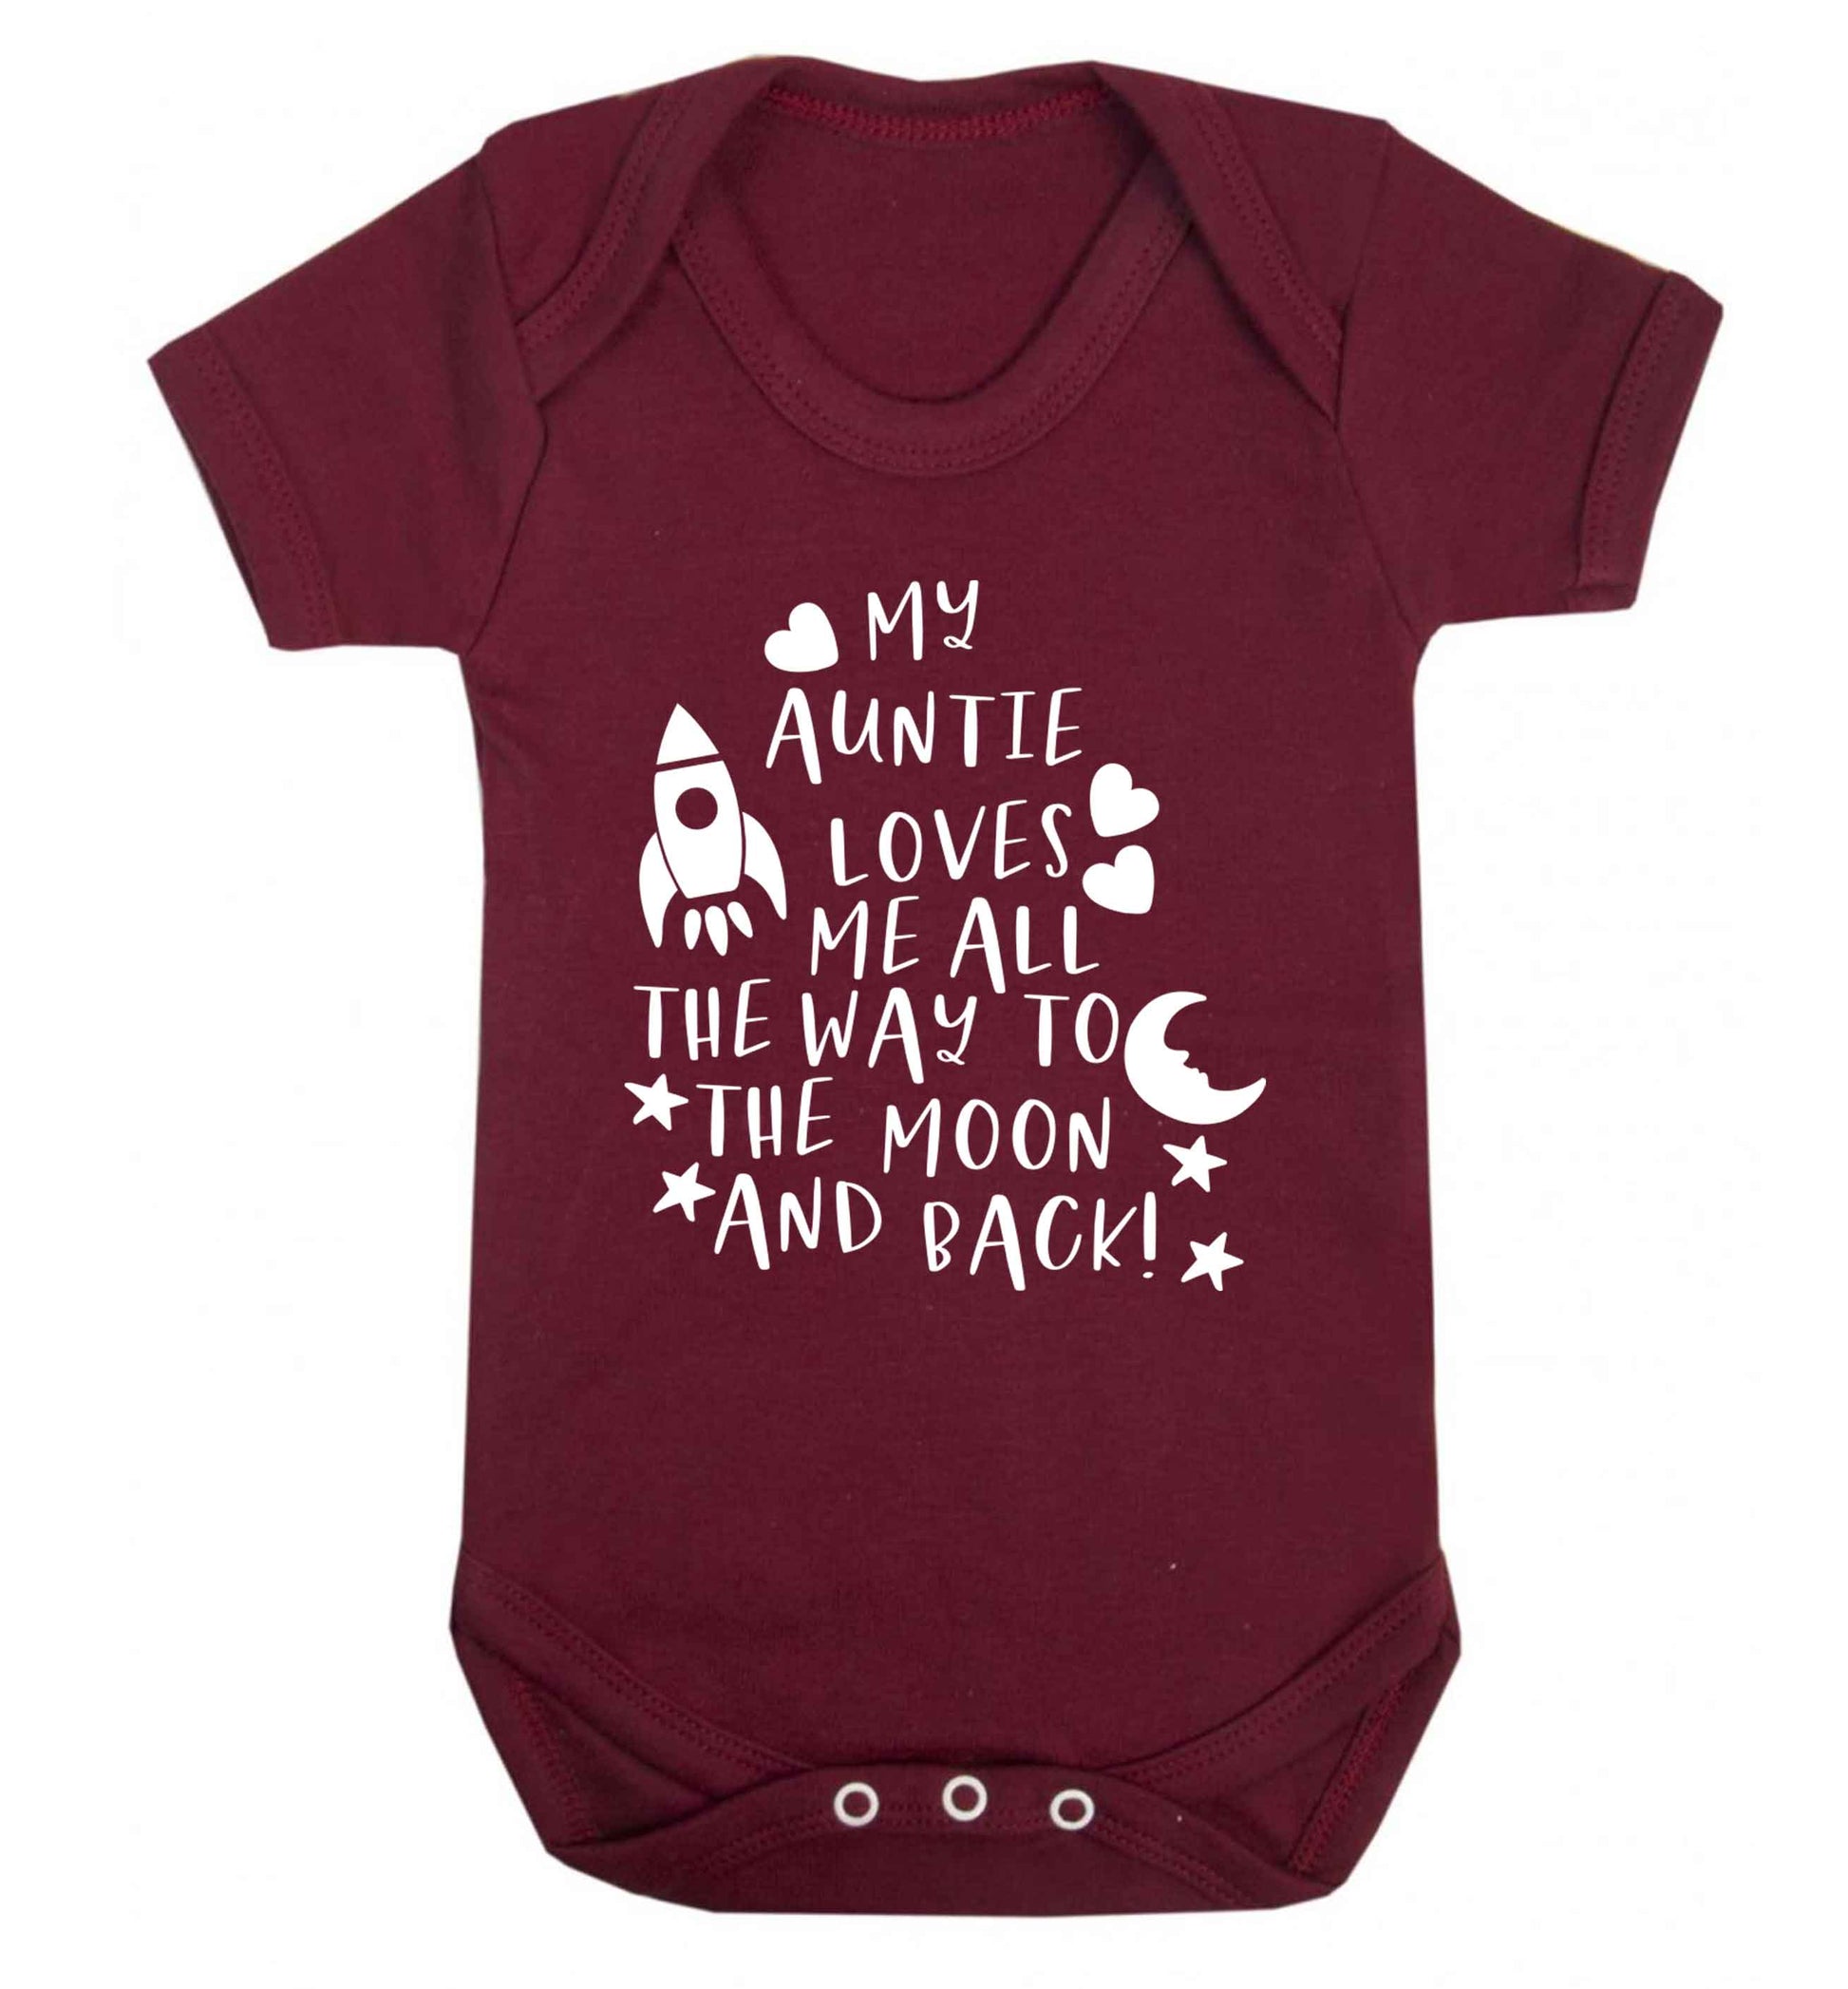 My auntie loves me all the way to the moon and back Baby Vest maroon 18-24 months